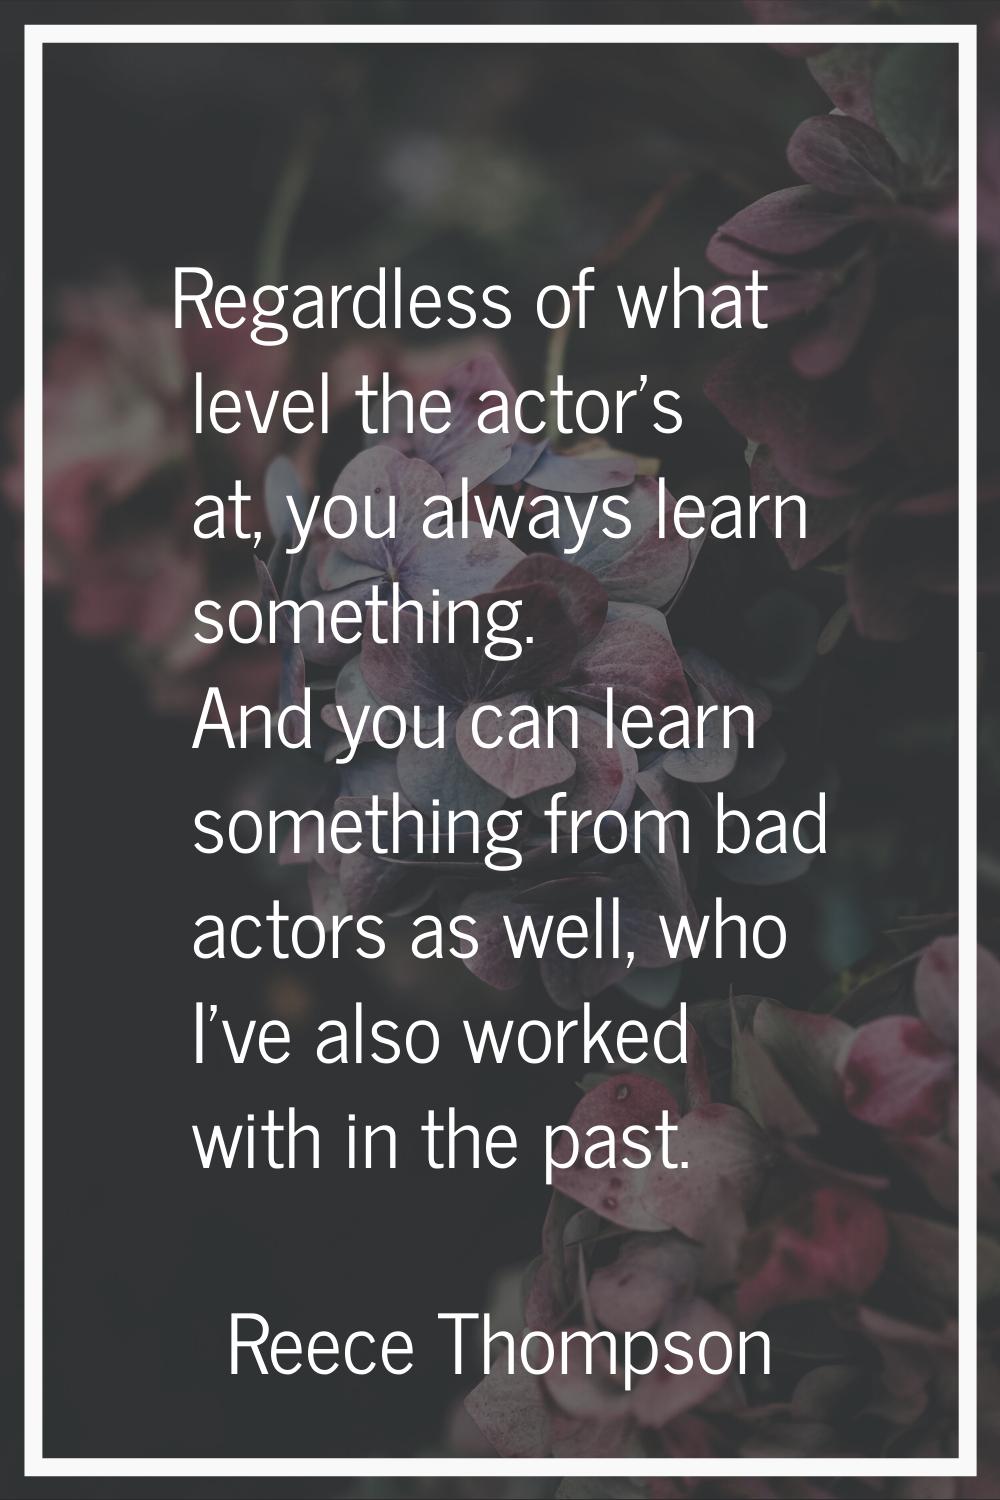 Regardless of what level the actor's at, you always learn something. And you can learn something fr